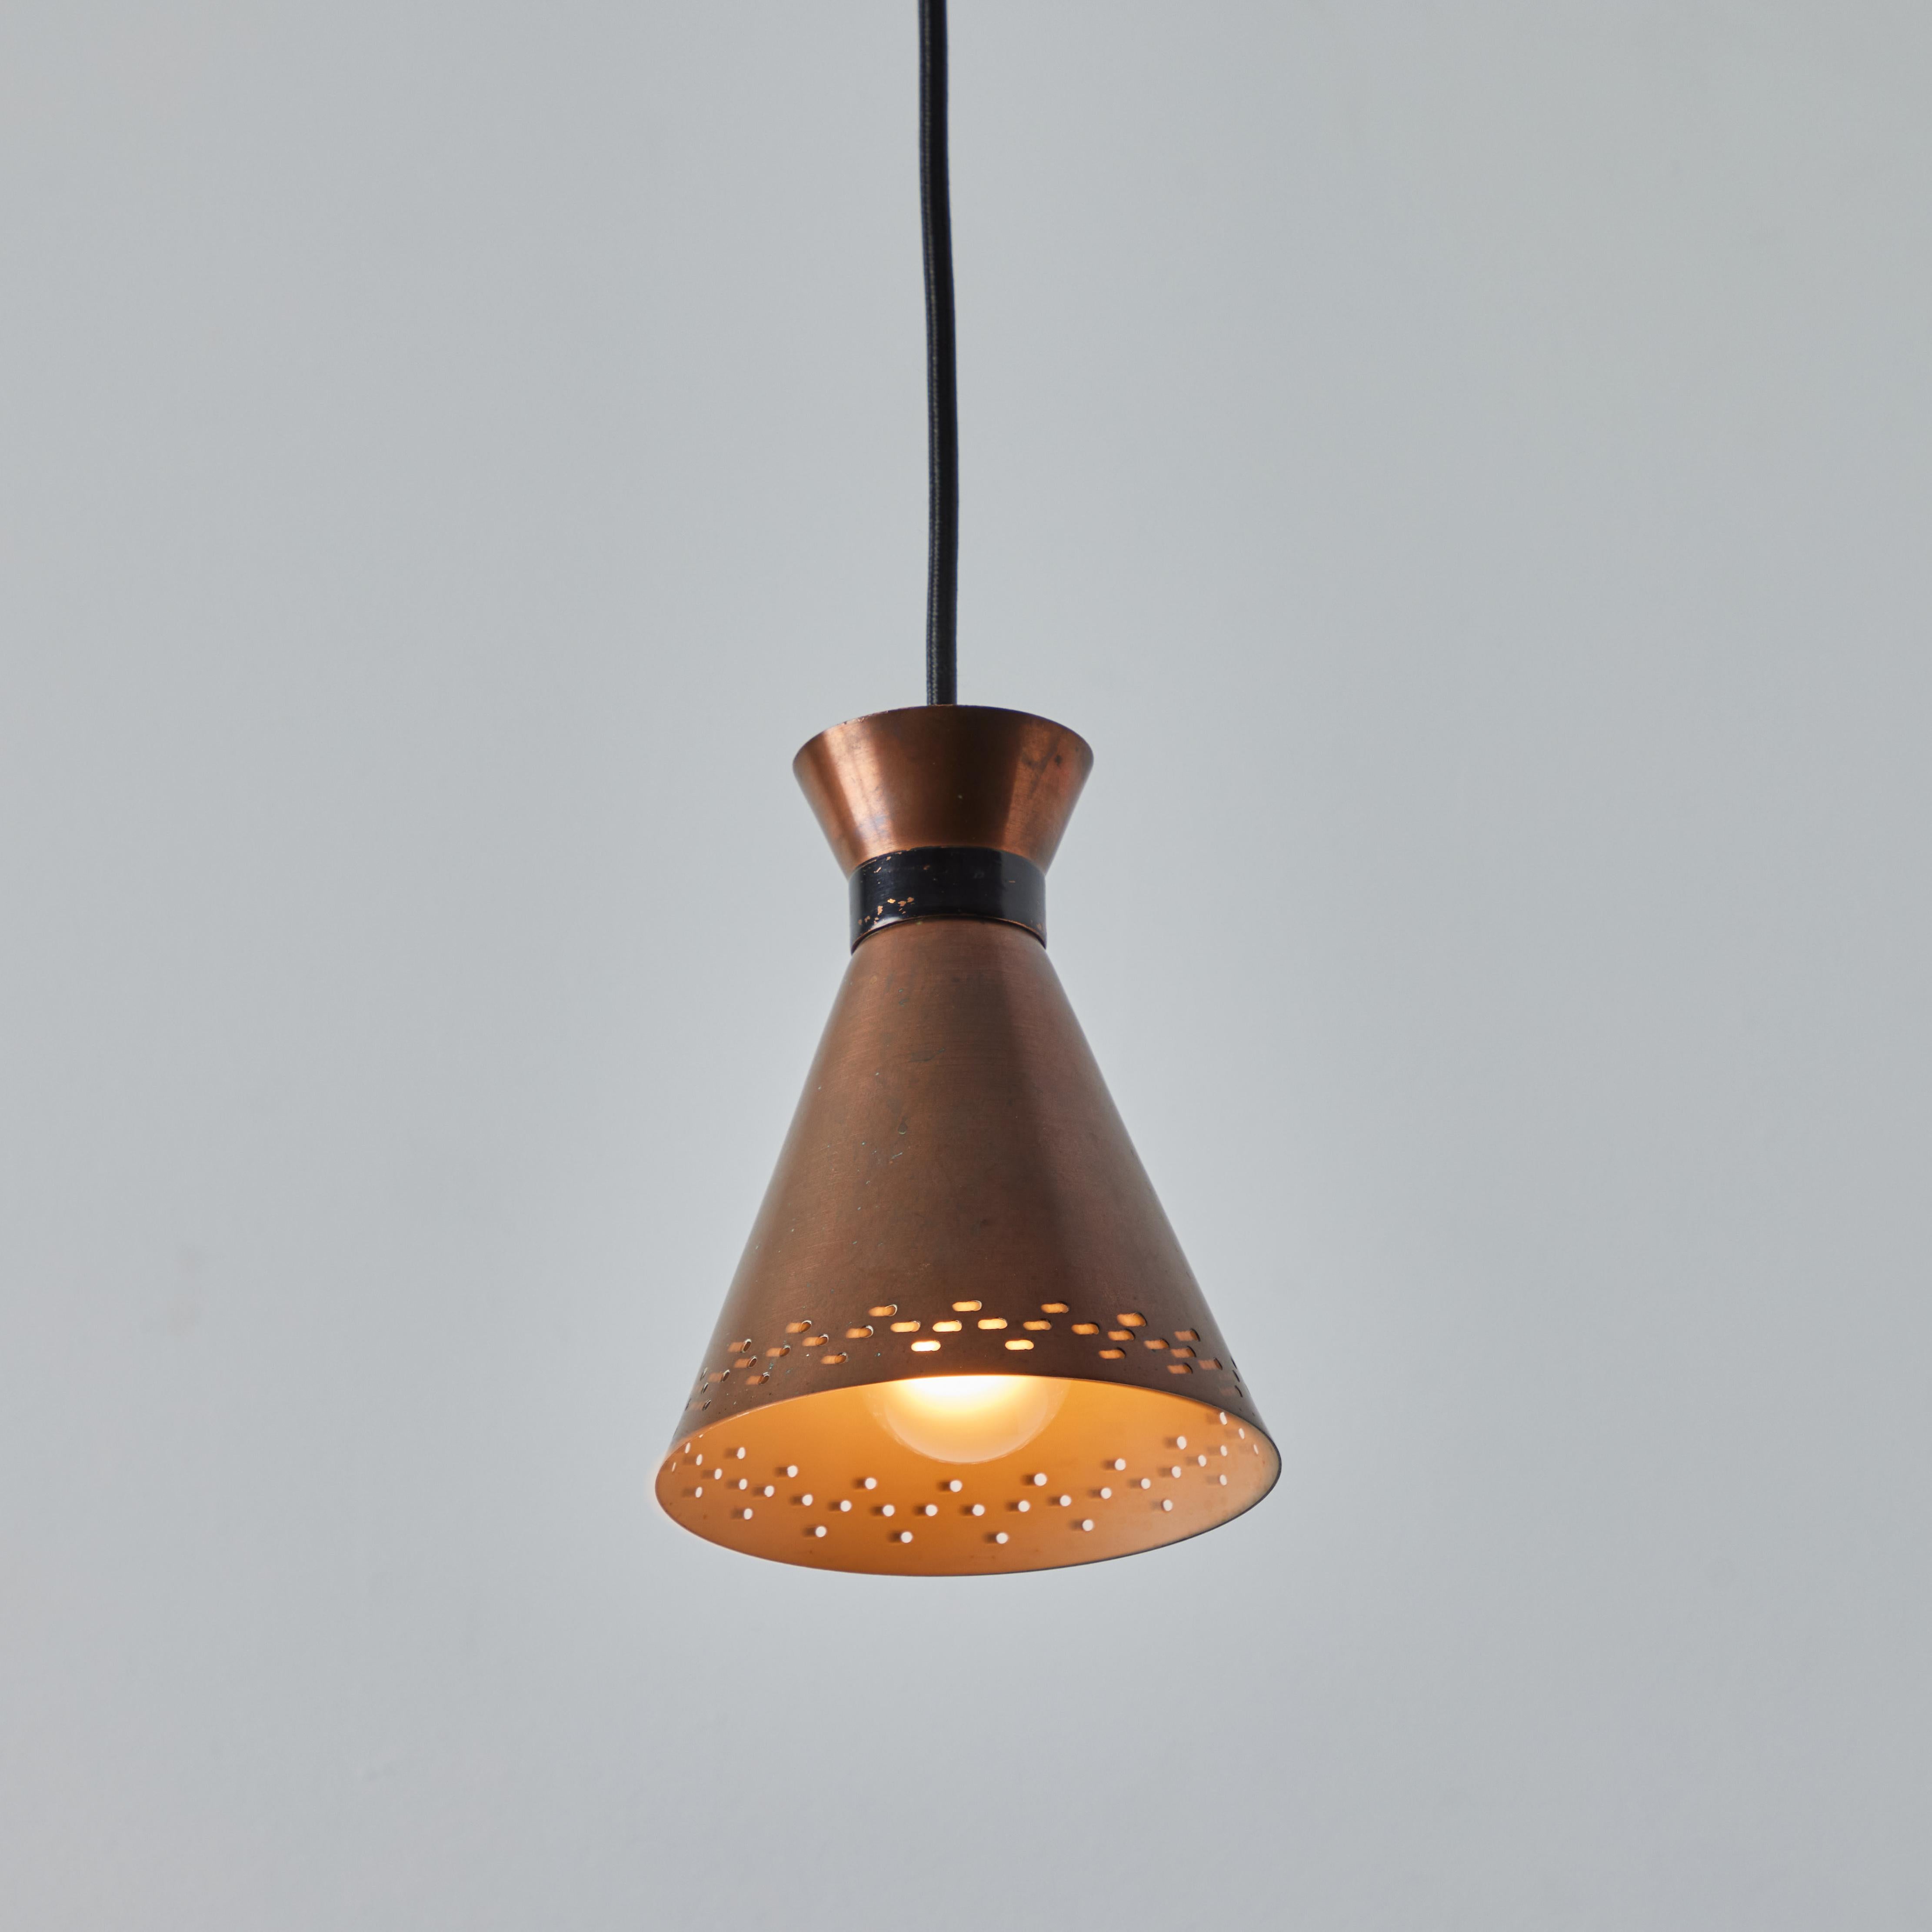 1950s Bent Karlby Perforated Diabolo Pendant in Copper for Lyfa. Executed in architecturally cut and elegantly shaped copper shades with black painted metal hardware, Denmark, circa 1950s. A quintessentially Danish Modern pendant lamp by a master